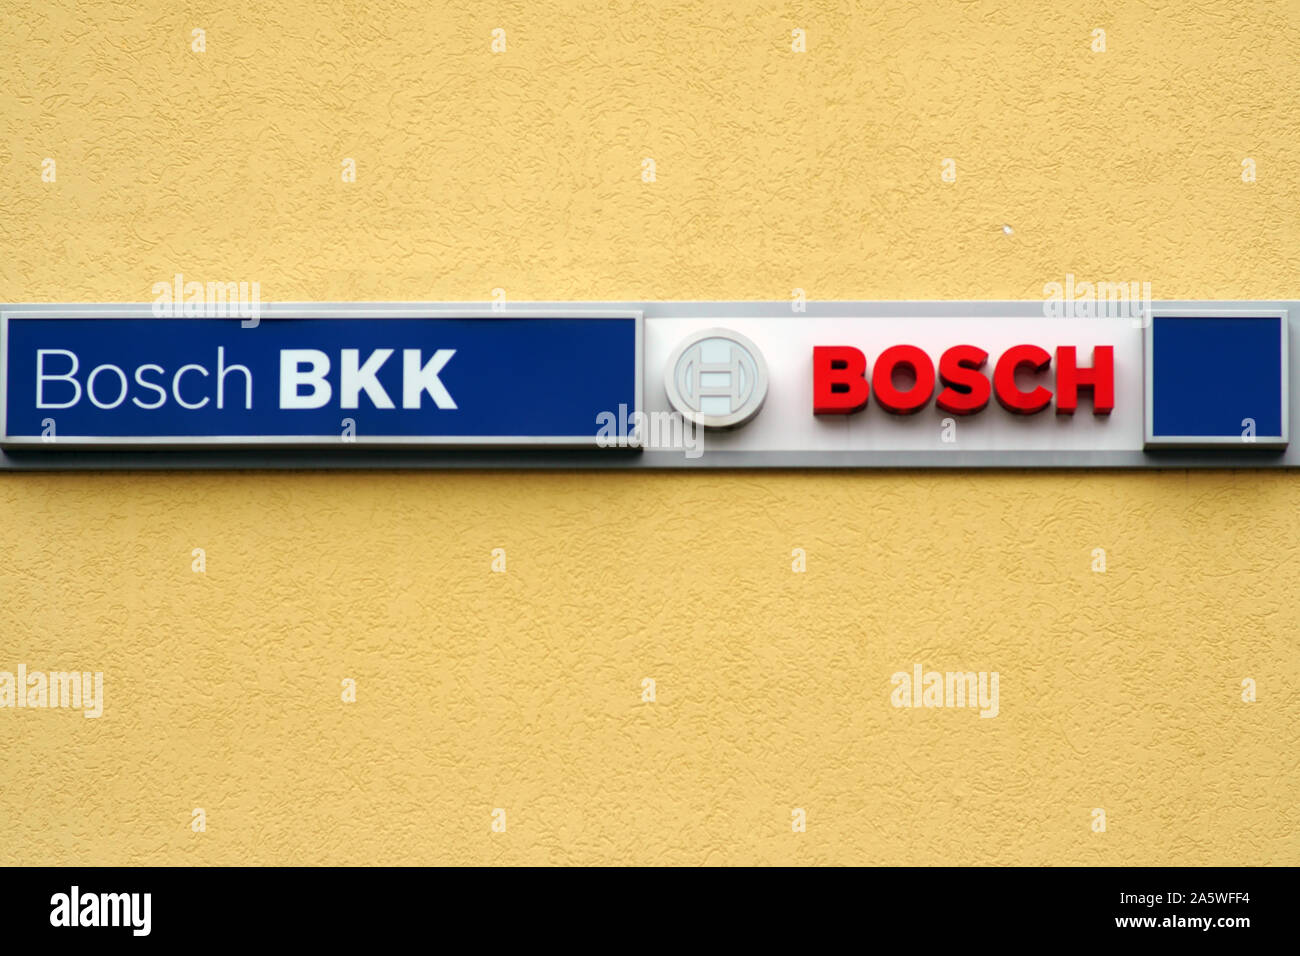 Homburg, Germany - October 19, 2019: The logo of the health insurance company Bosch BKK on the facade of an office and commercial building on 19 Octob Stock Photo